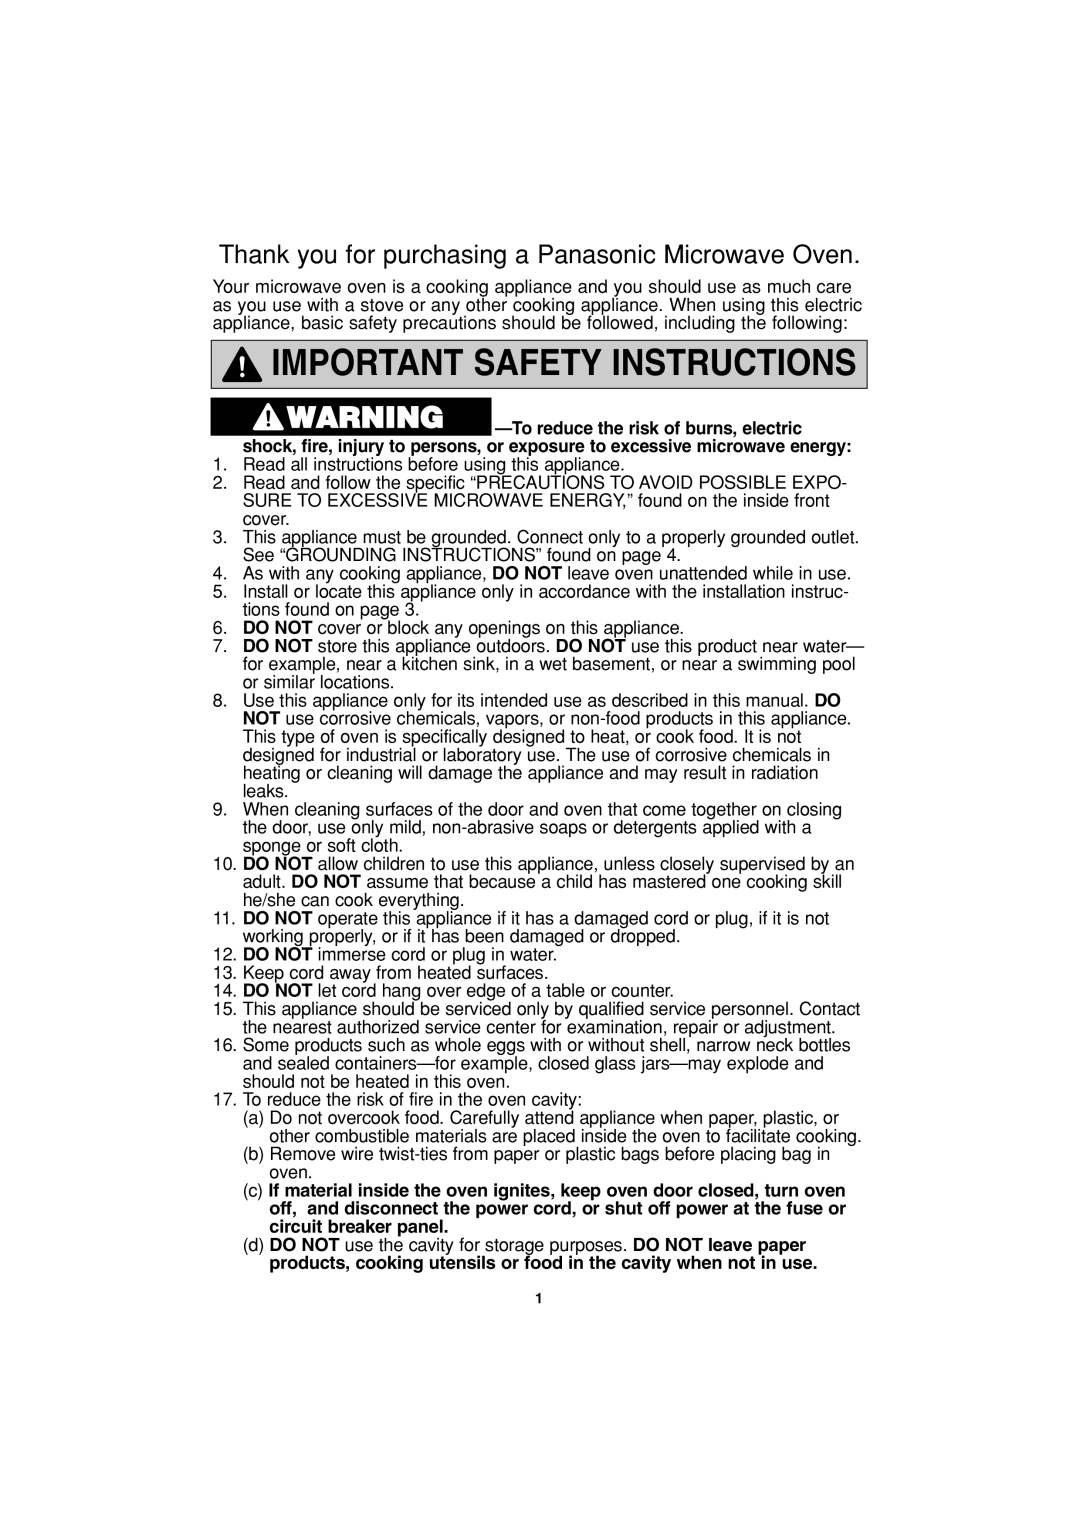 Panasonic NN-S953, NN-S753 Important Safety Instructions, Thank you for purchasing a Panasonic Microwave Oven 